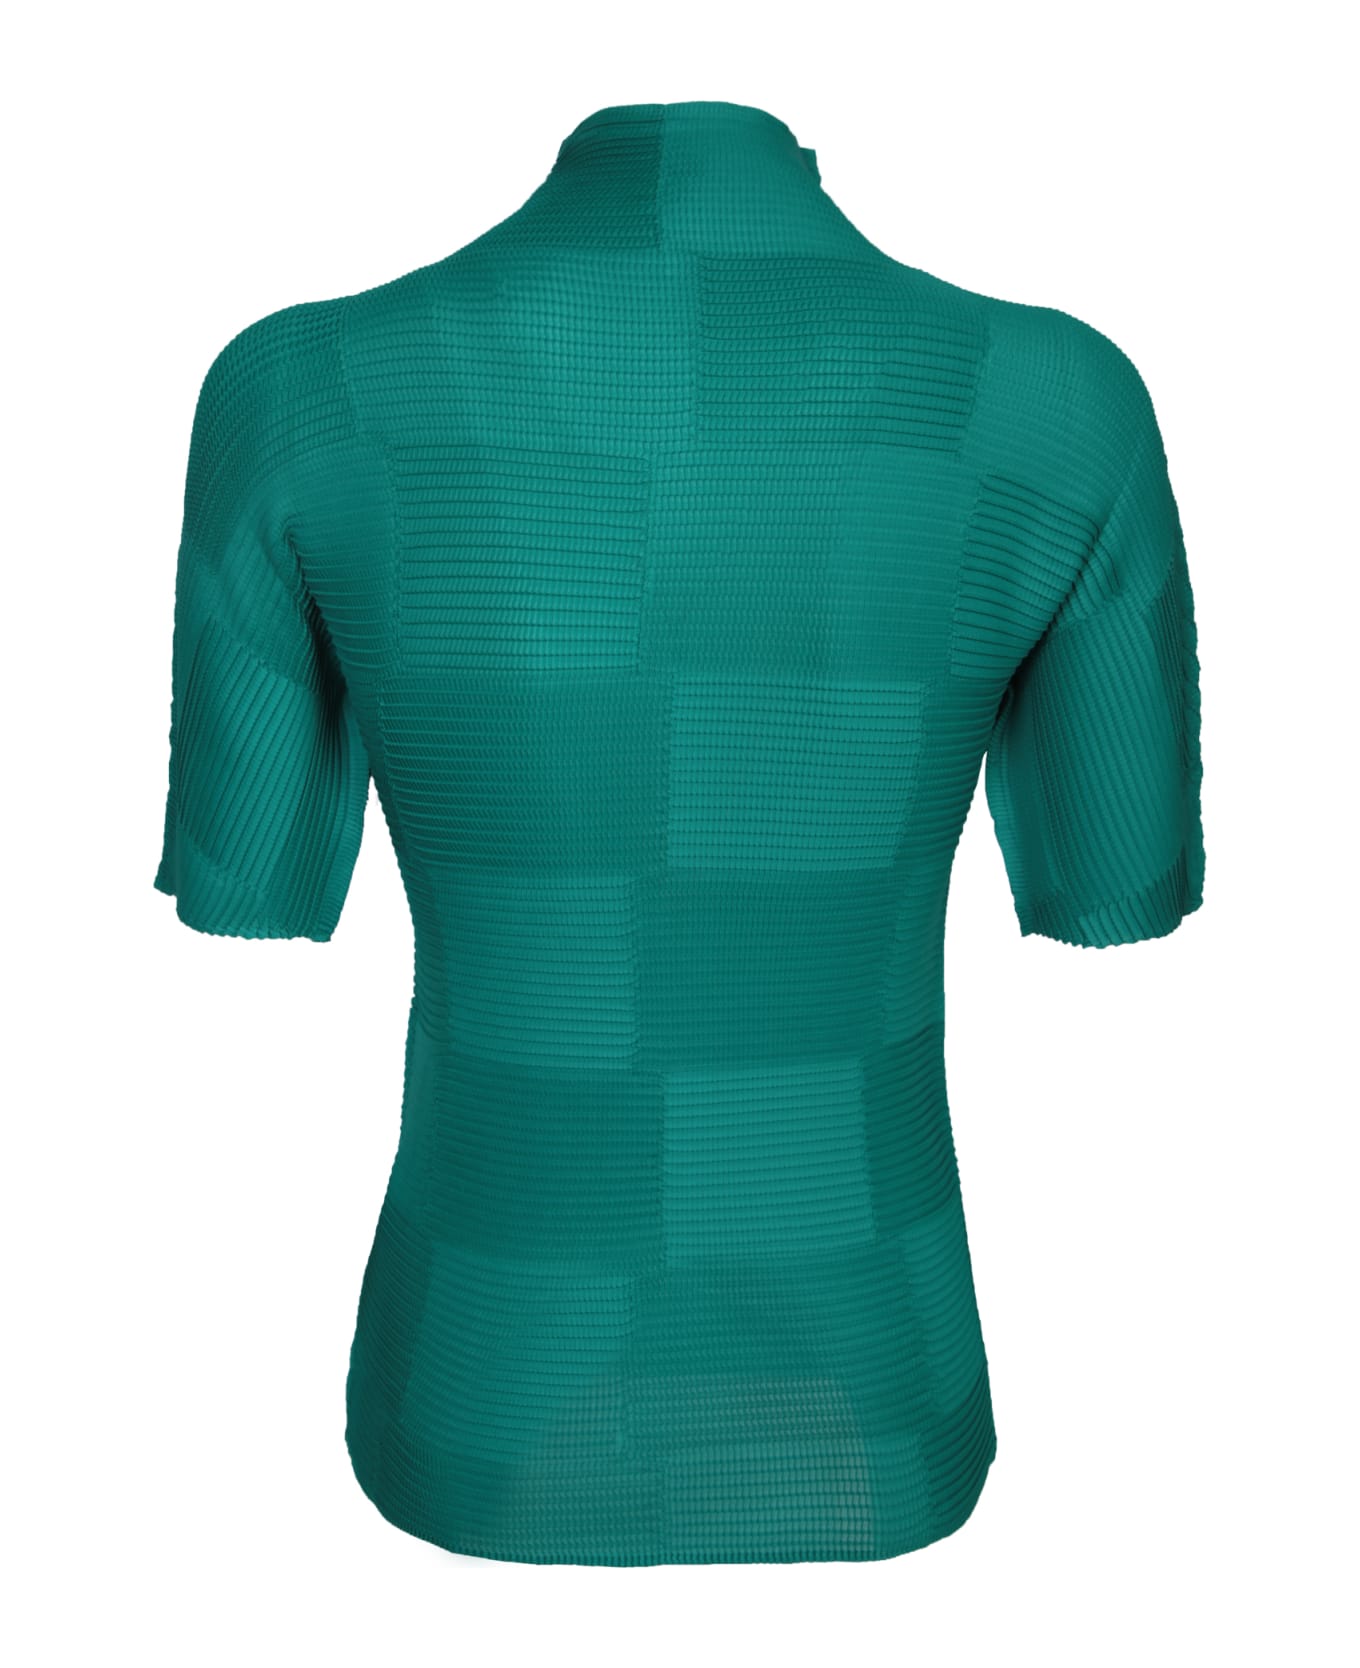 Issey Miyake Pleated Green Top - Green